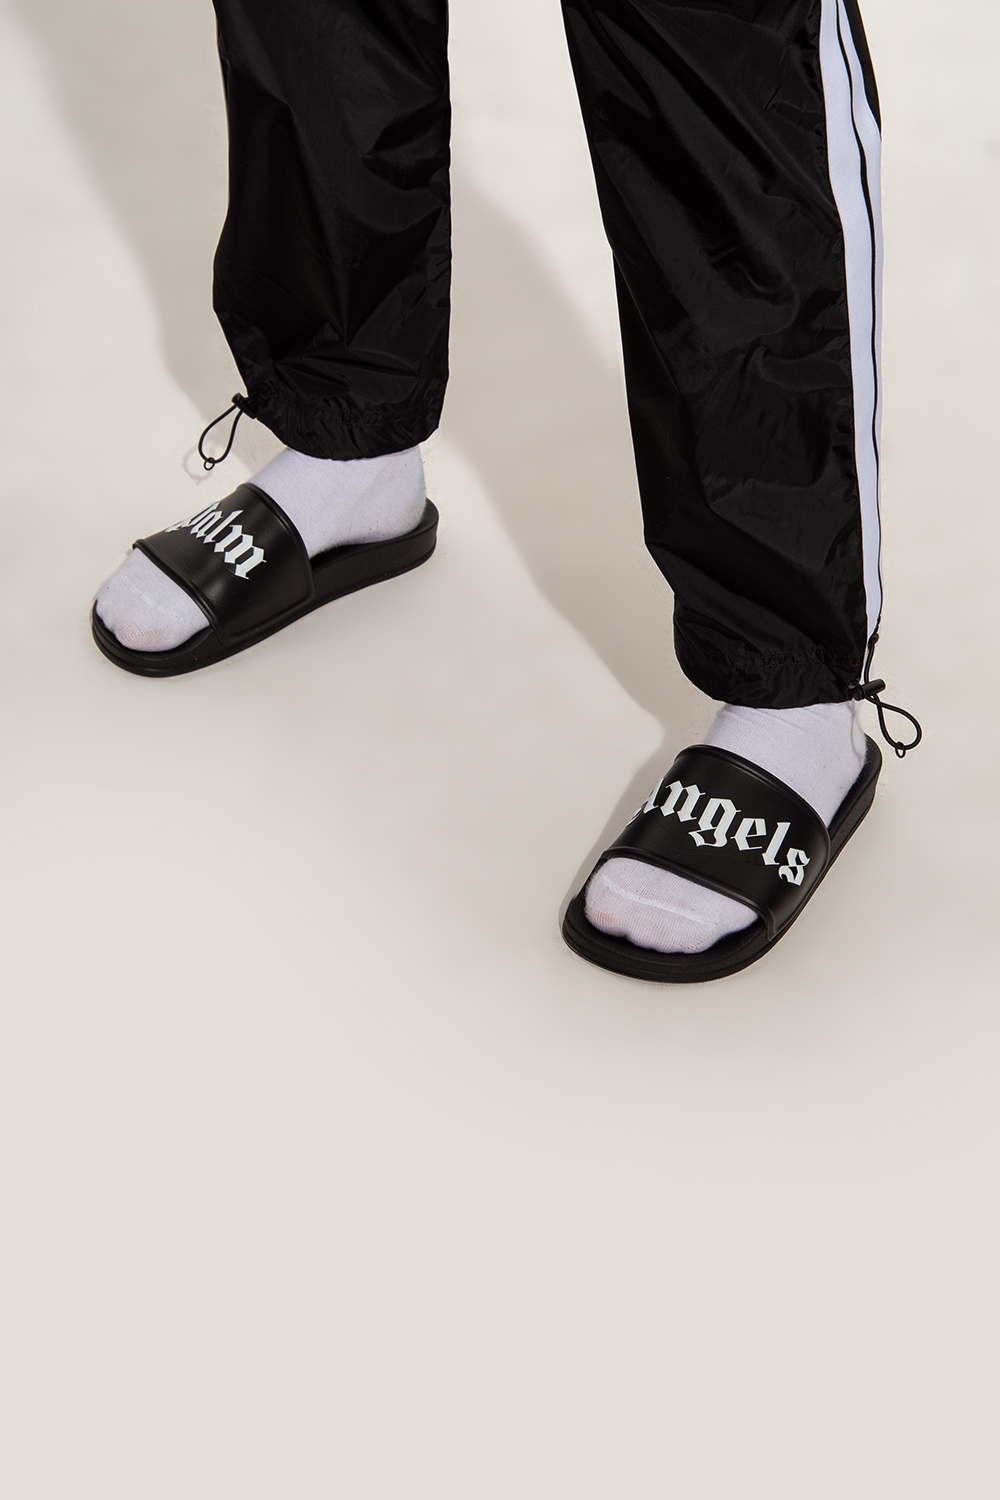 Palm Angels bass weejuns apron boots